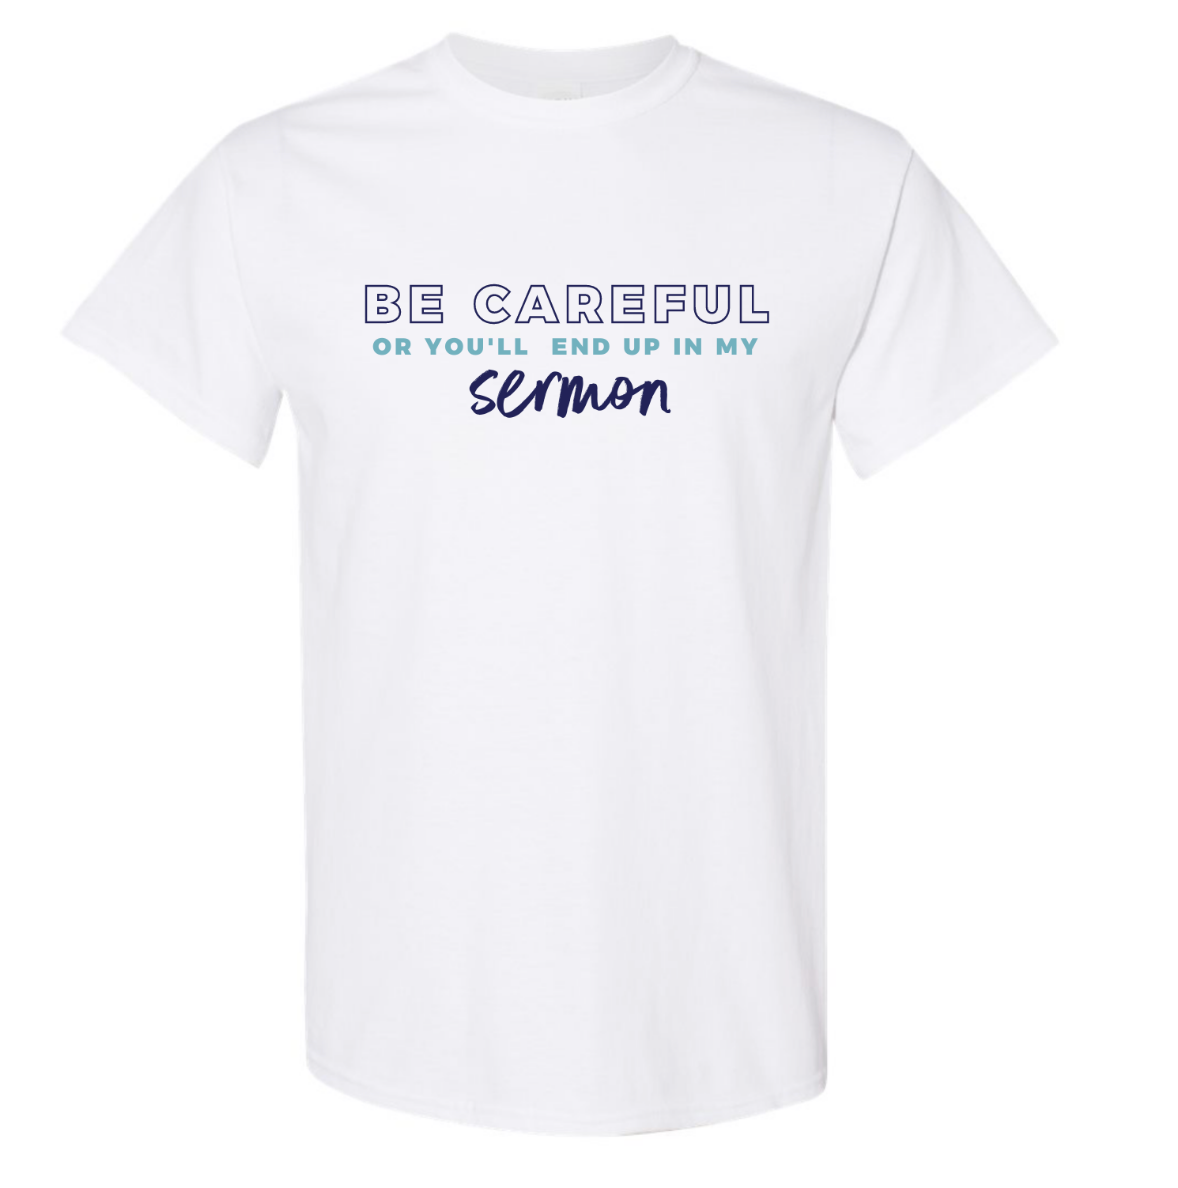 BE CAREFUL OR YOU'LL END UP IN MY SERMON white t-shirt